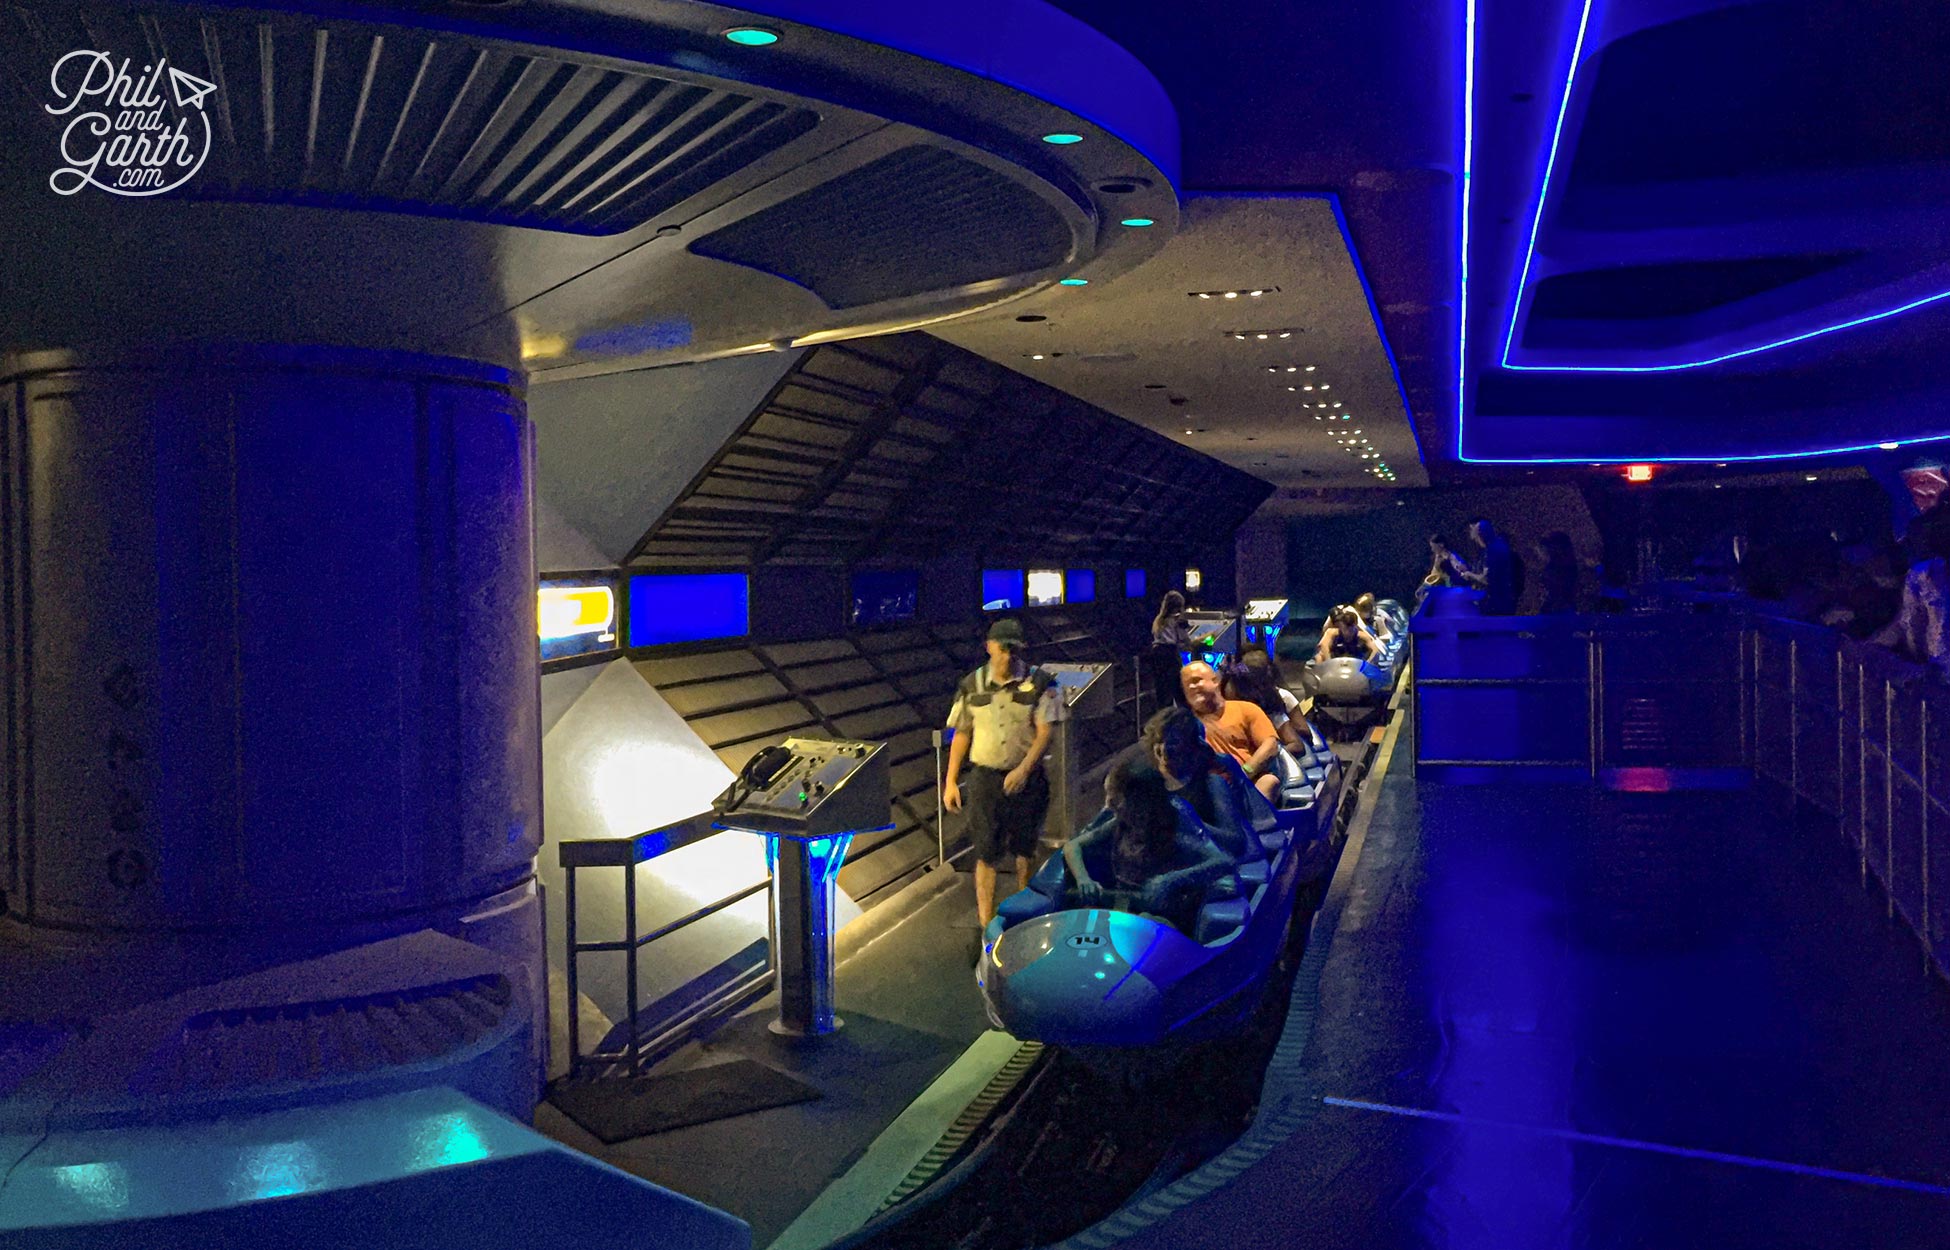 Waiting in line to get onboard the Space Mountain rollercoaster